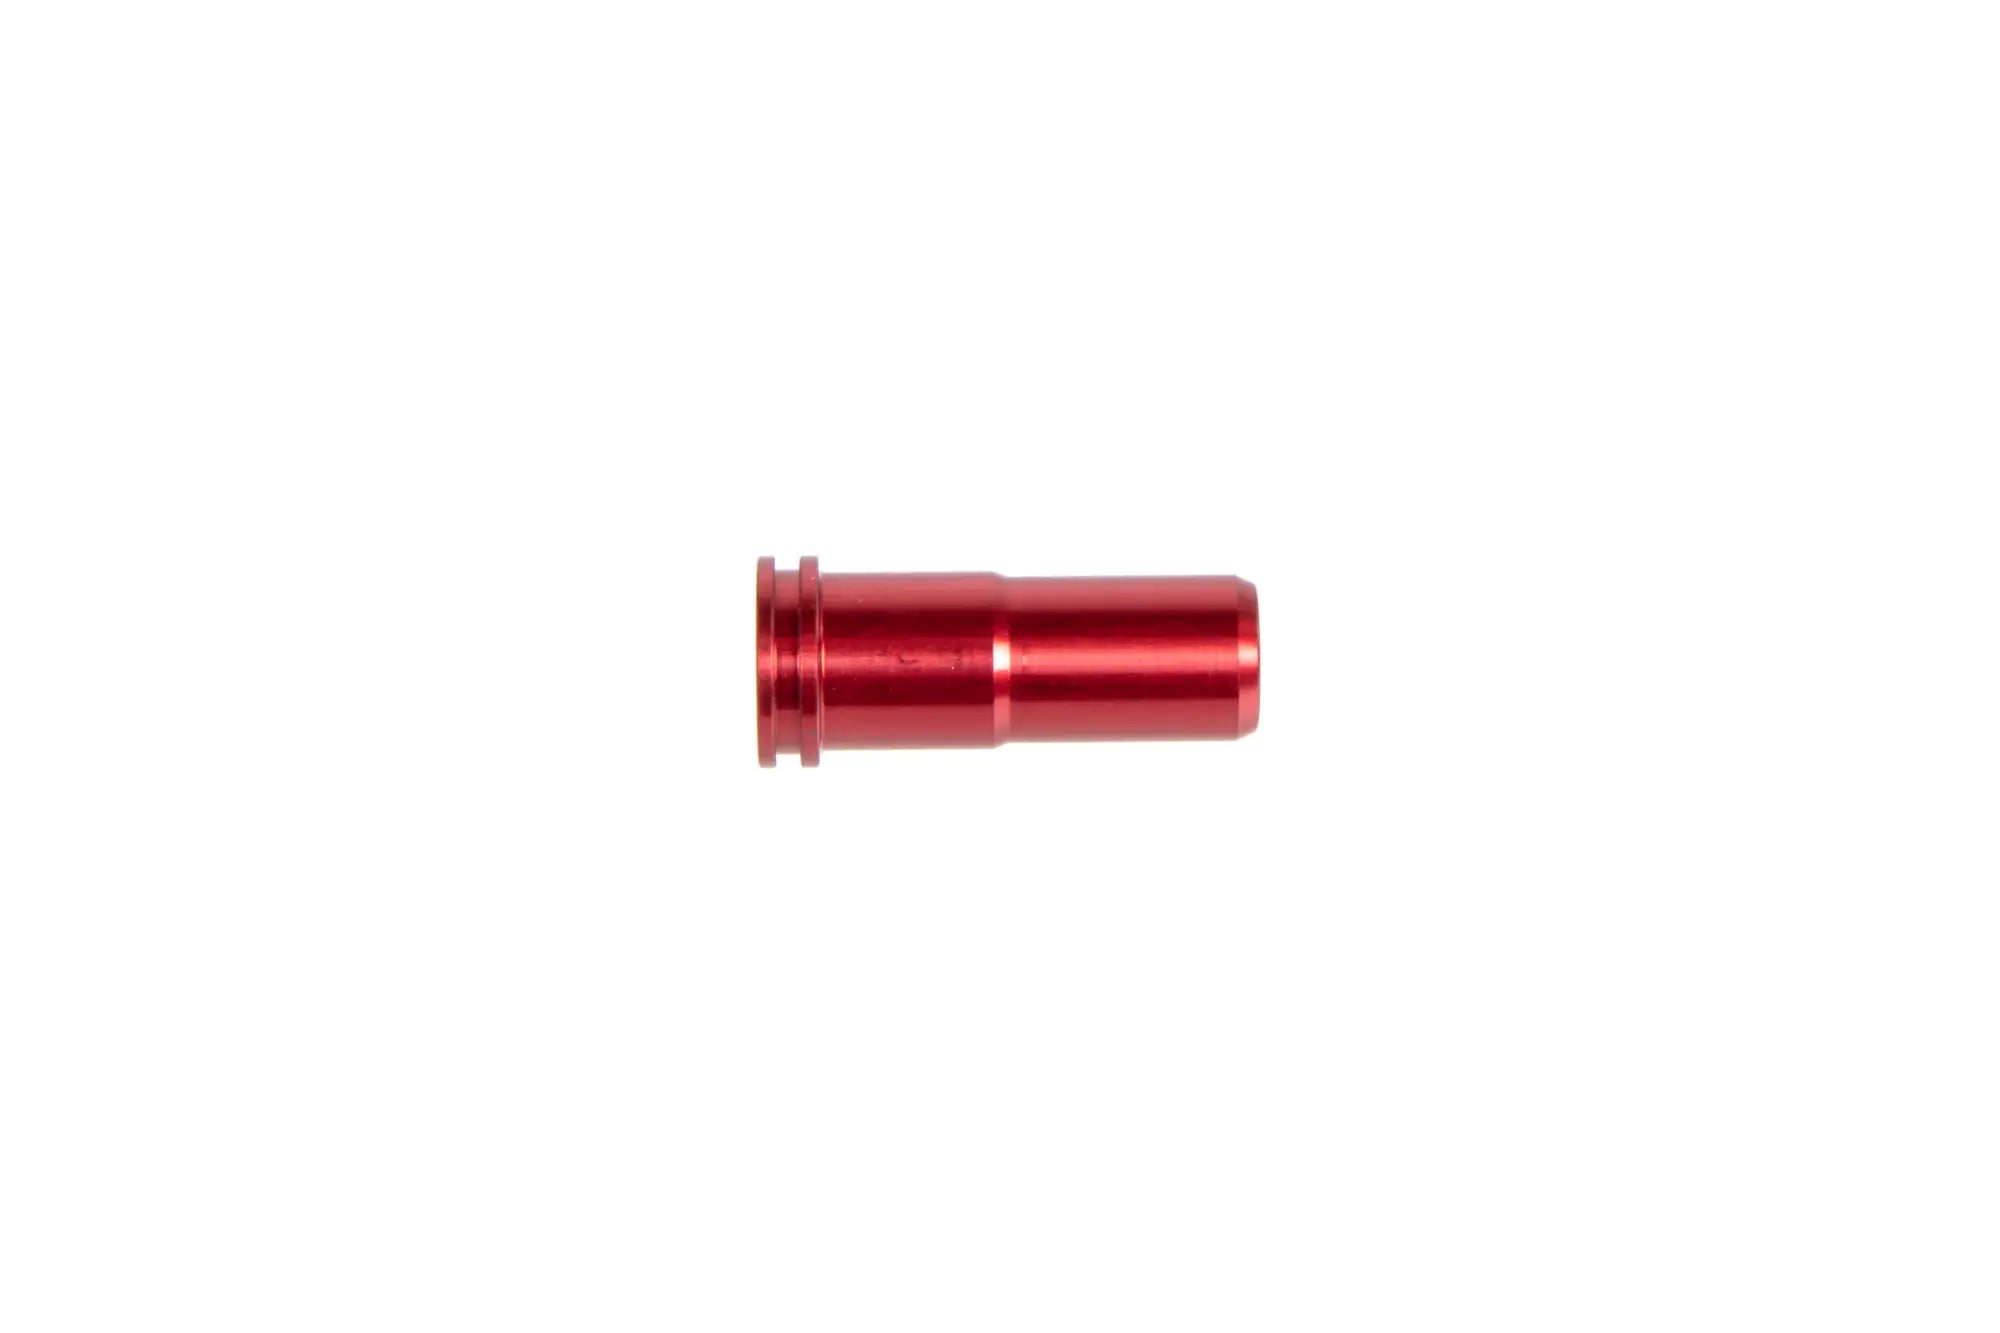 Sealed ERGAL nozzle for M4/AR-15 replicas 21.10mm Red-2